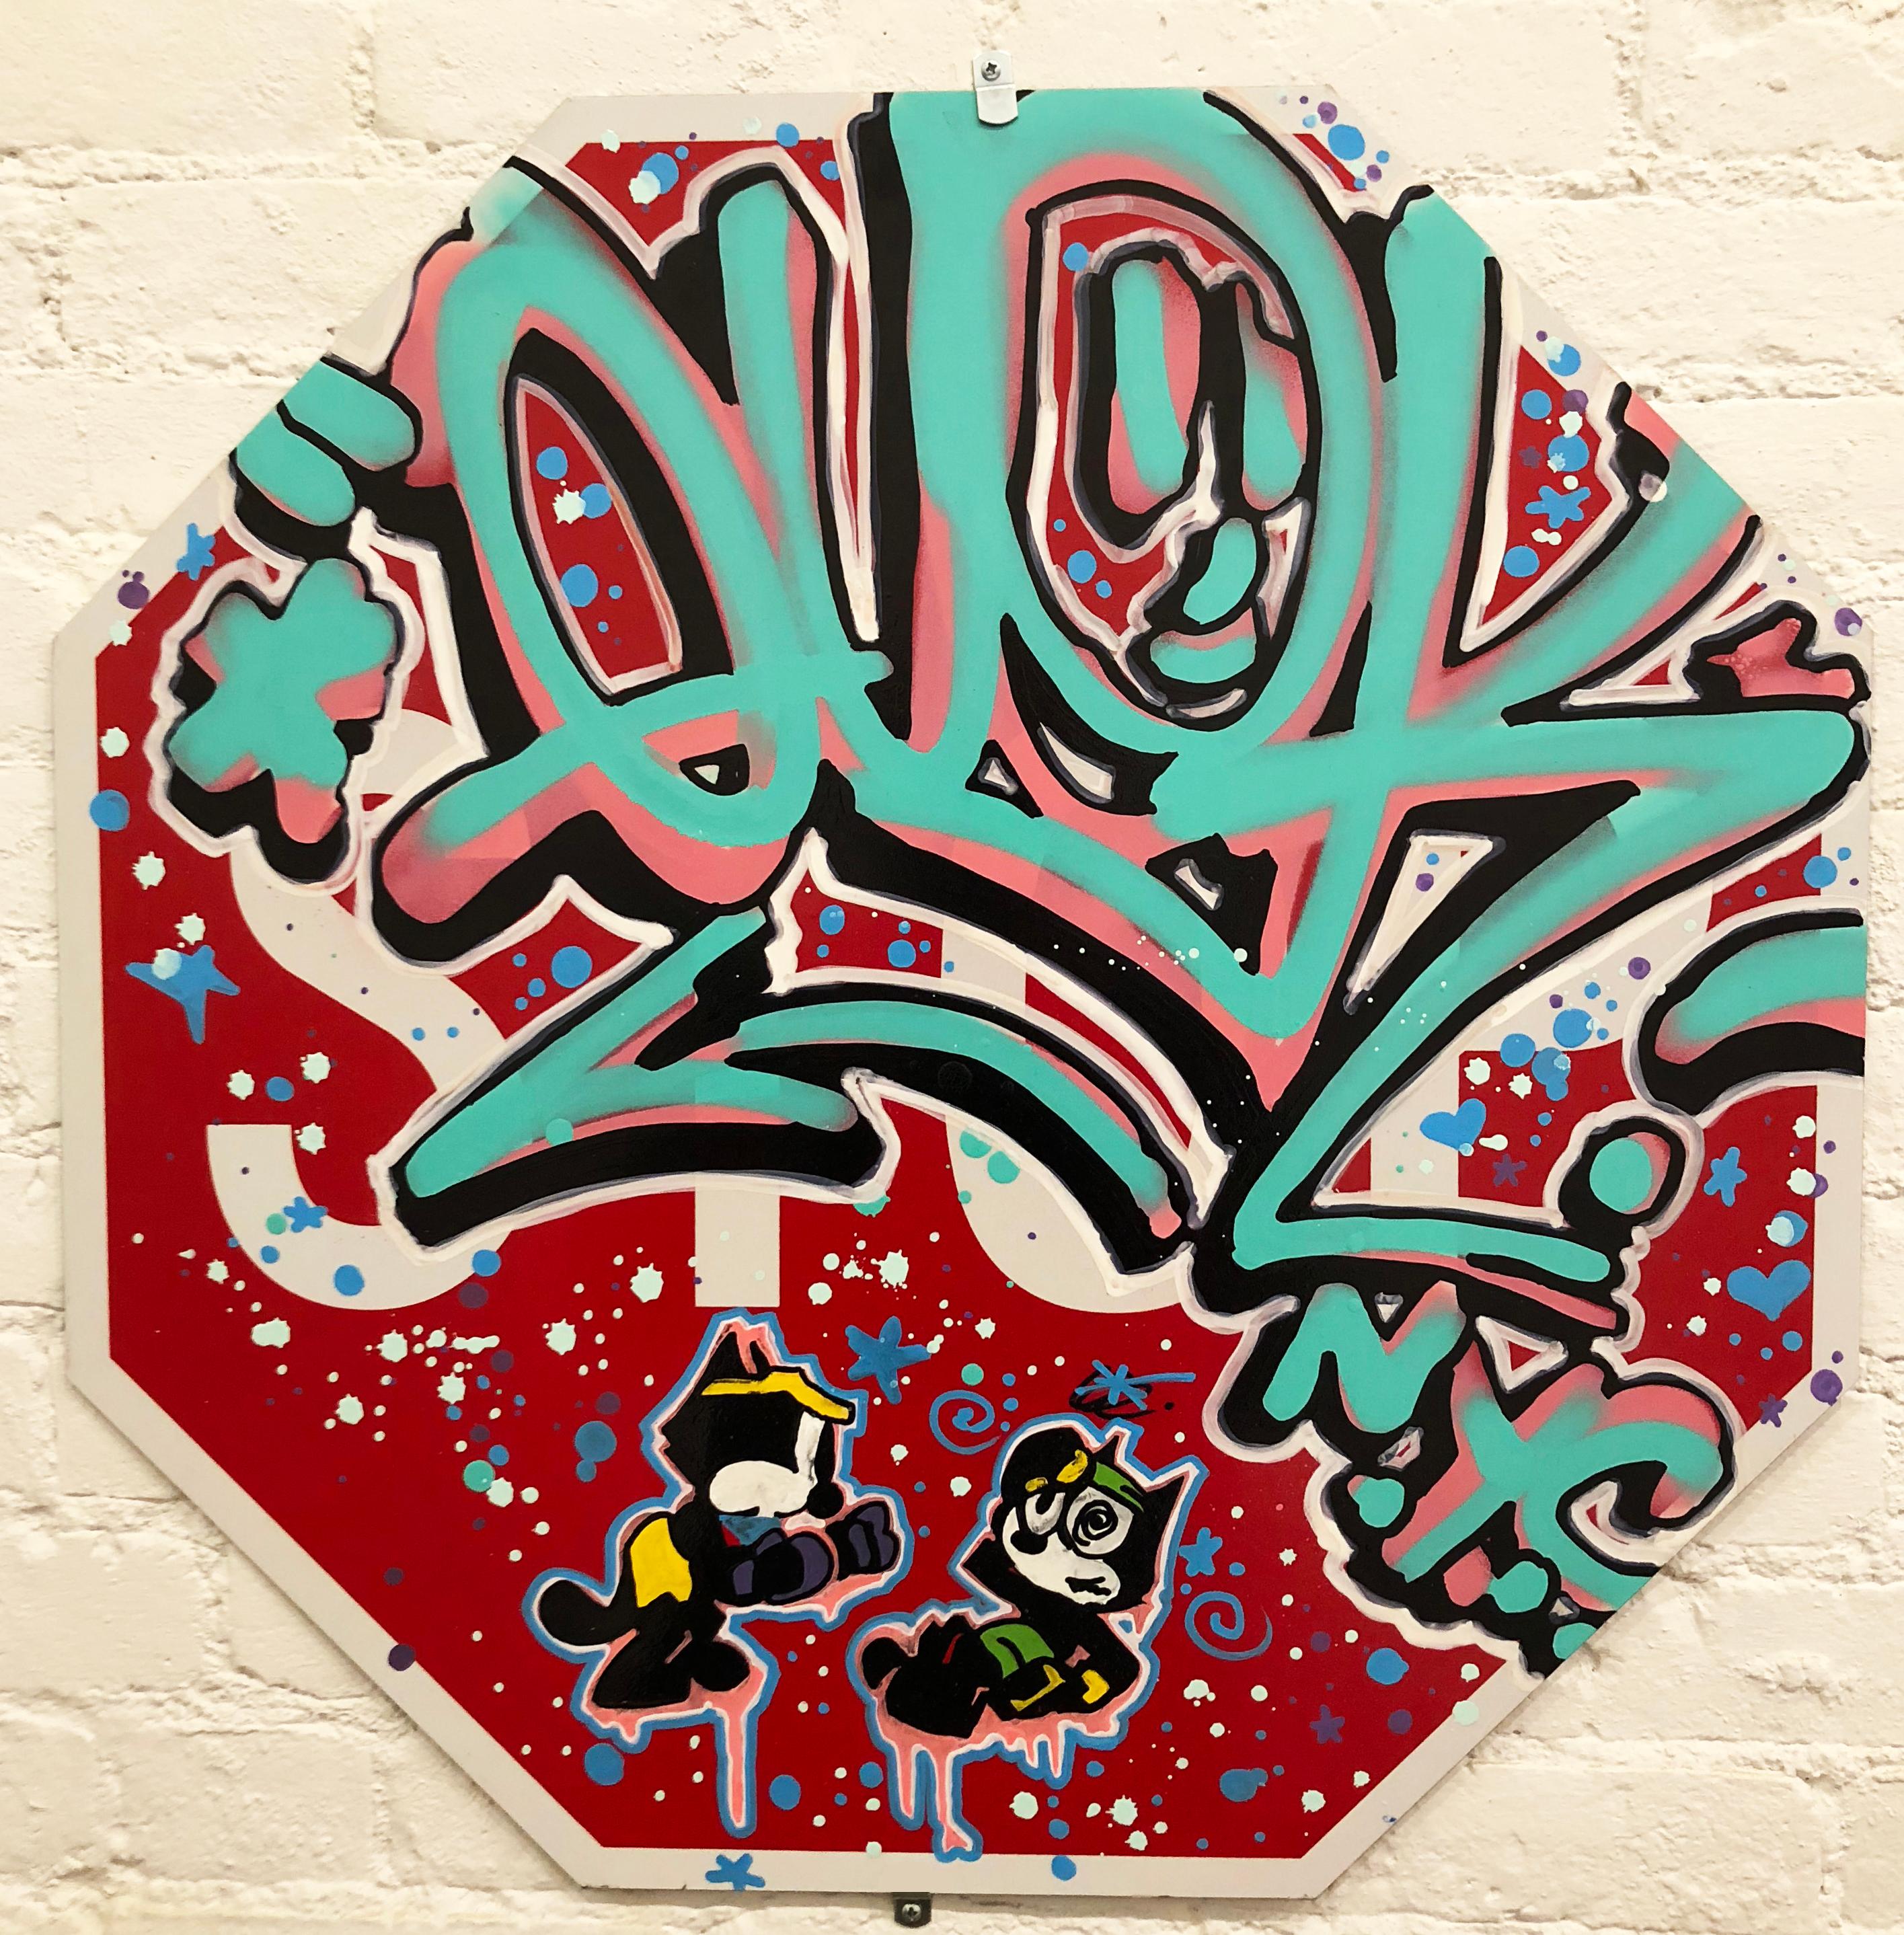 Quik's piece is acrylic and oil paint on an authentic street sign.

Growing up in Queens, NY, Lin Felton a.k.a. QUIK (American, b.1958) started tagging around his neighborhood during the 1970s. By the 1980s, he was one of the few New York Graffiti